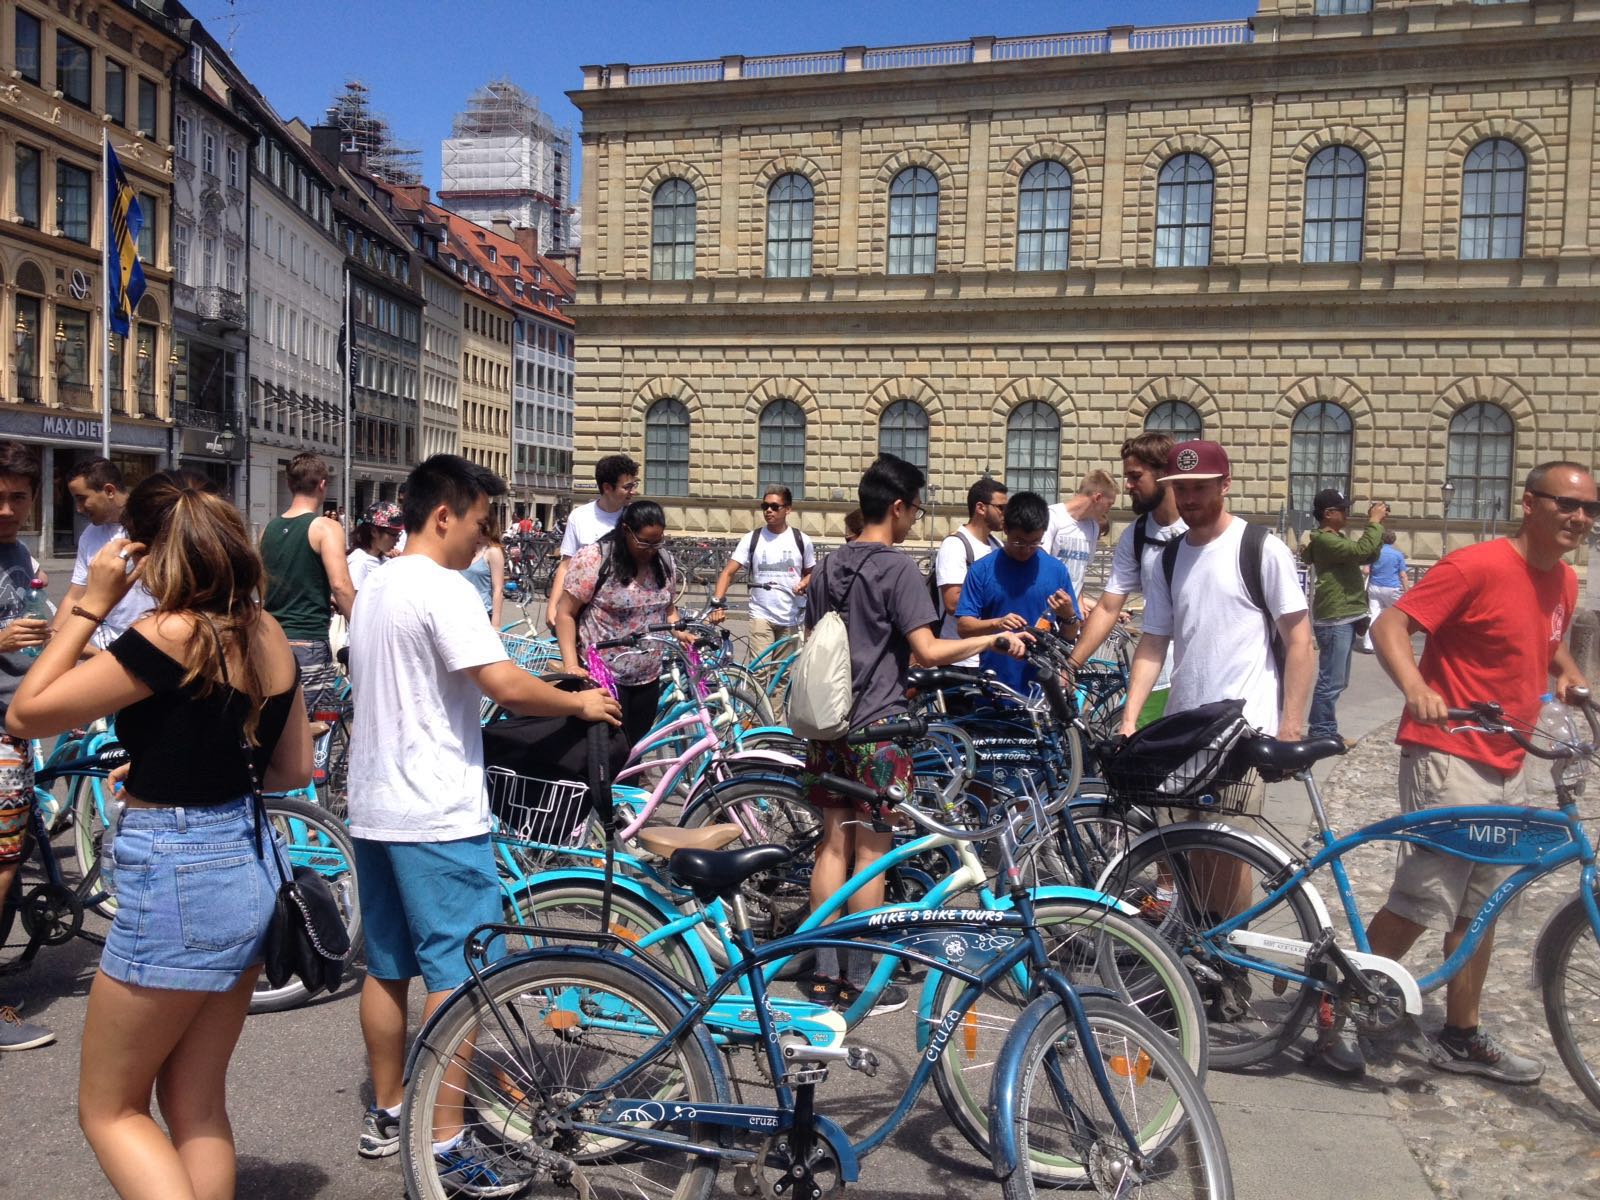 Students in front of the National Theater Munich at the Munich Bike Tour on a sunny day